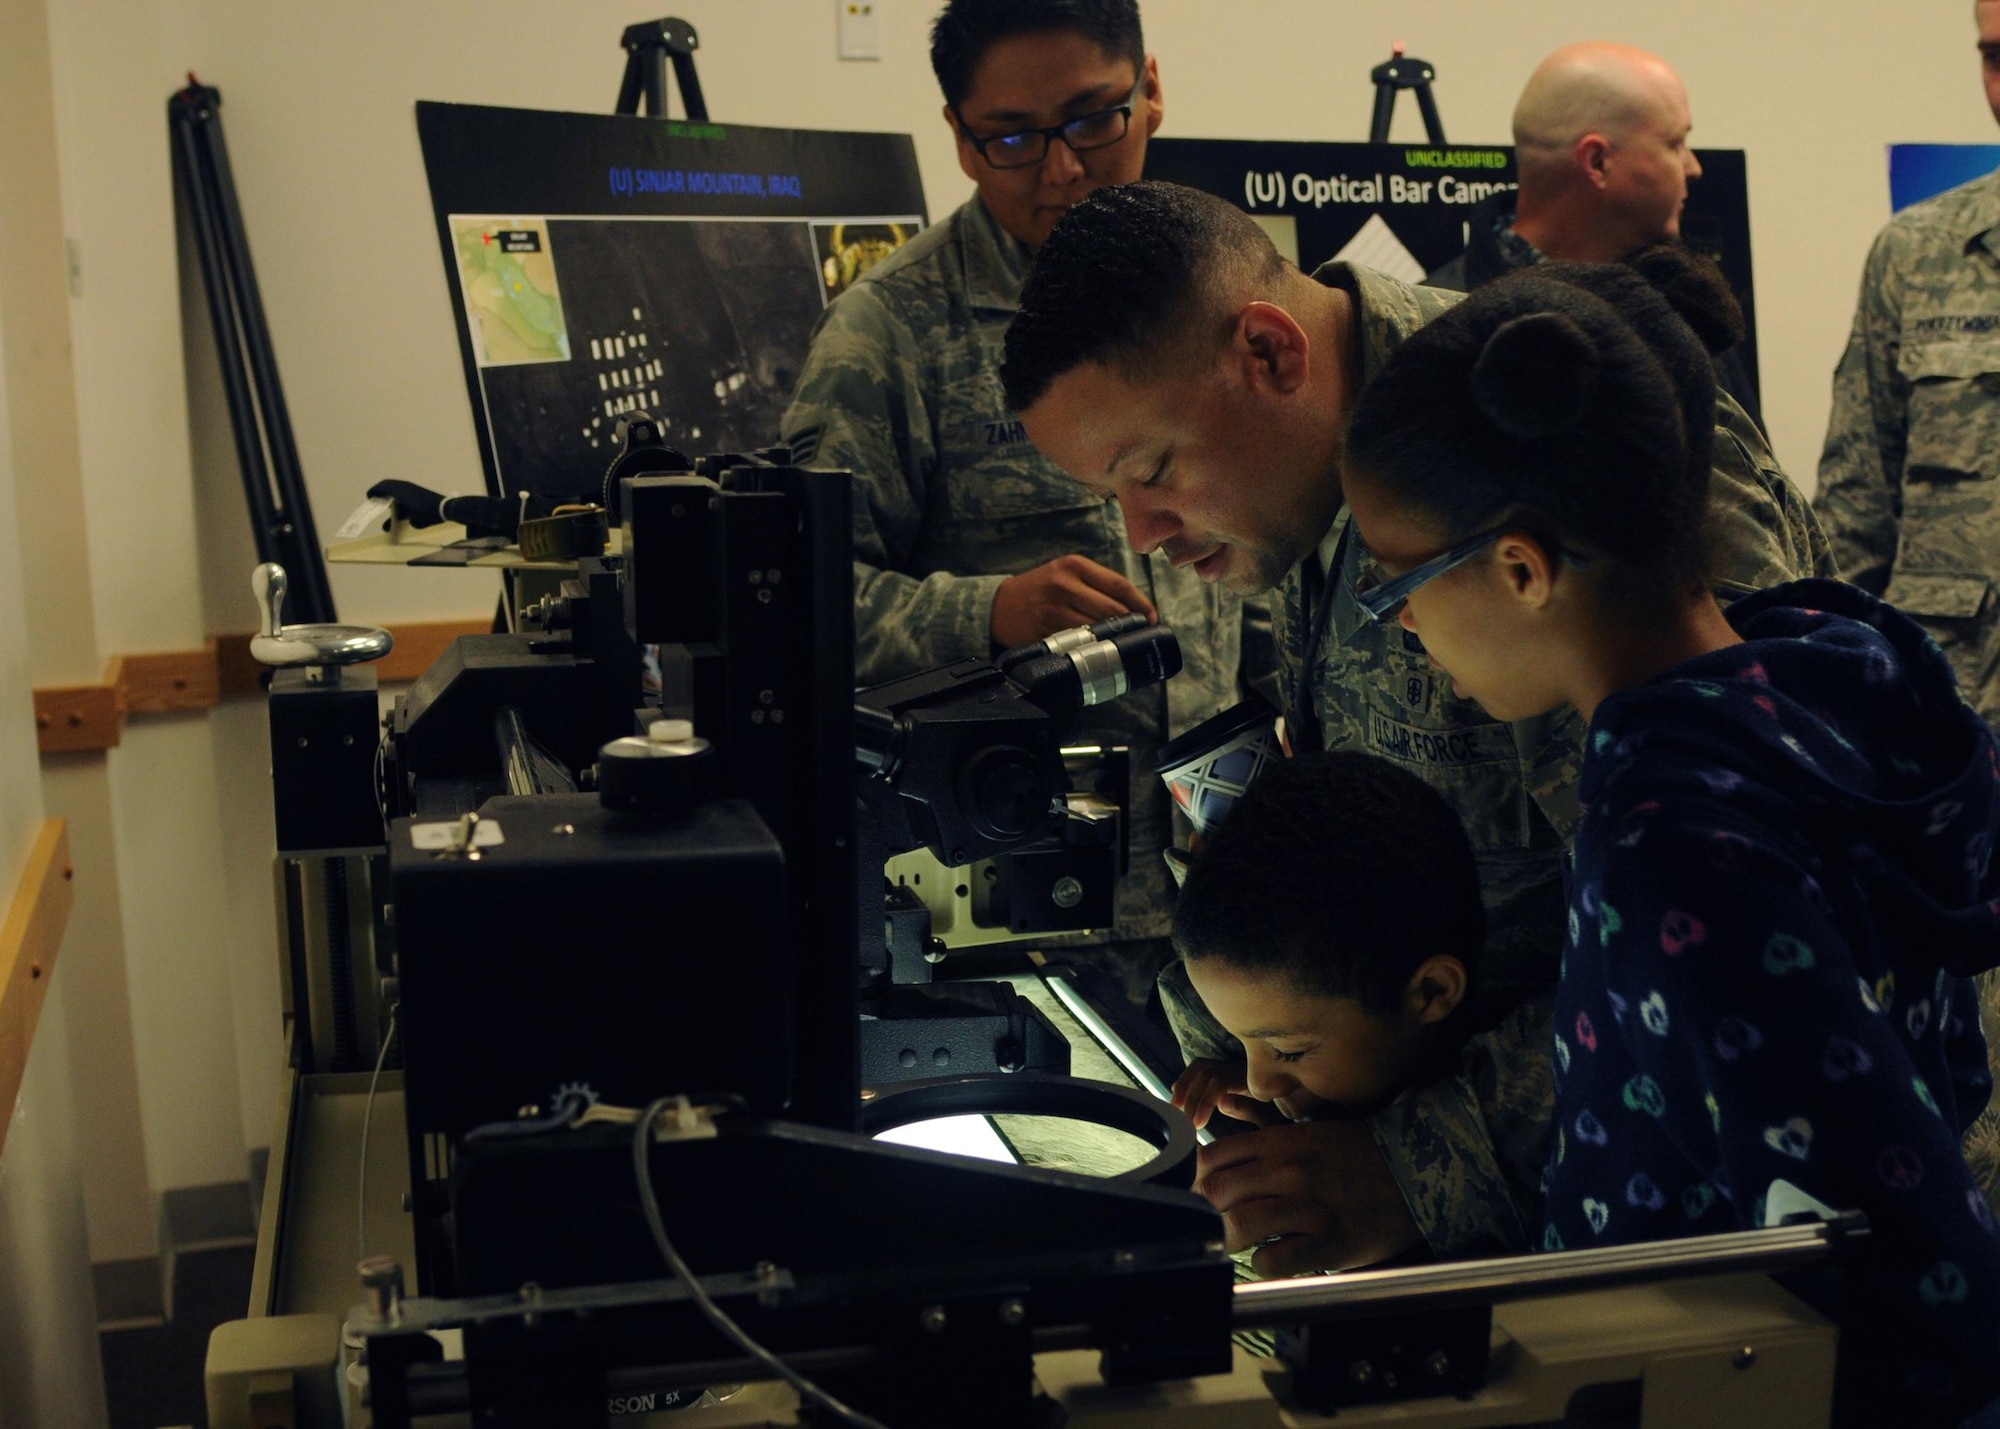 Master Sgt. Charles examines optical bar camera film with his children at an open house for the 548th Intelligence, Surveillance and Reconnaissance Group at Beale Air Force Base, April 13, 2016. The 548th ISR Group opened their doors, allowing family members to get an inside look at the work their Airmen do on a daily basis. (U.S. Air Force photo by Airman 1st Class Jessica B.  Nelson/Released)